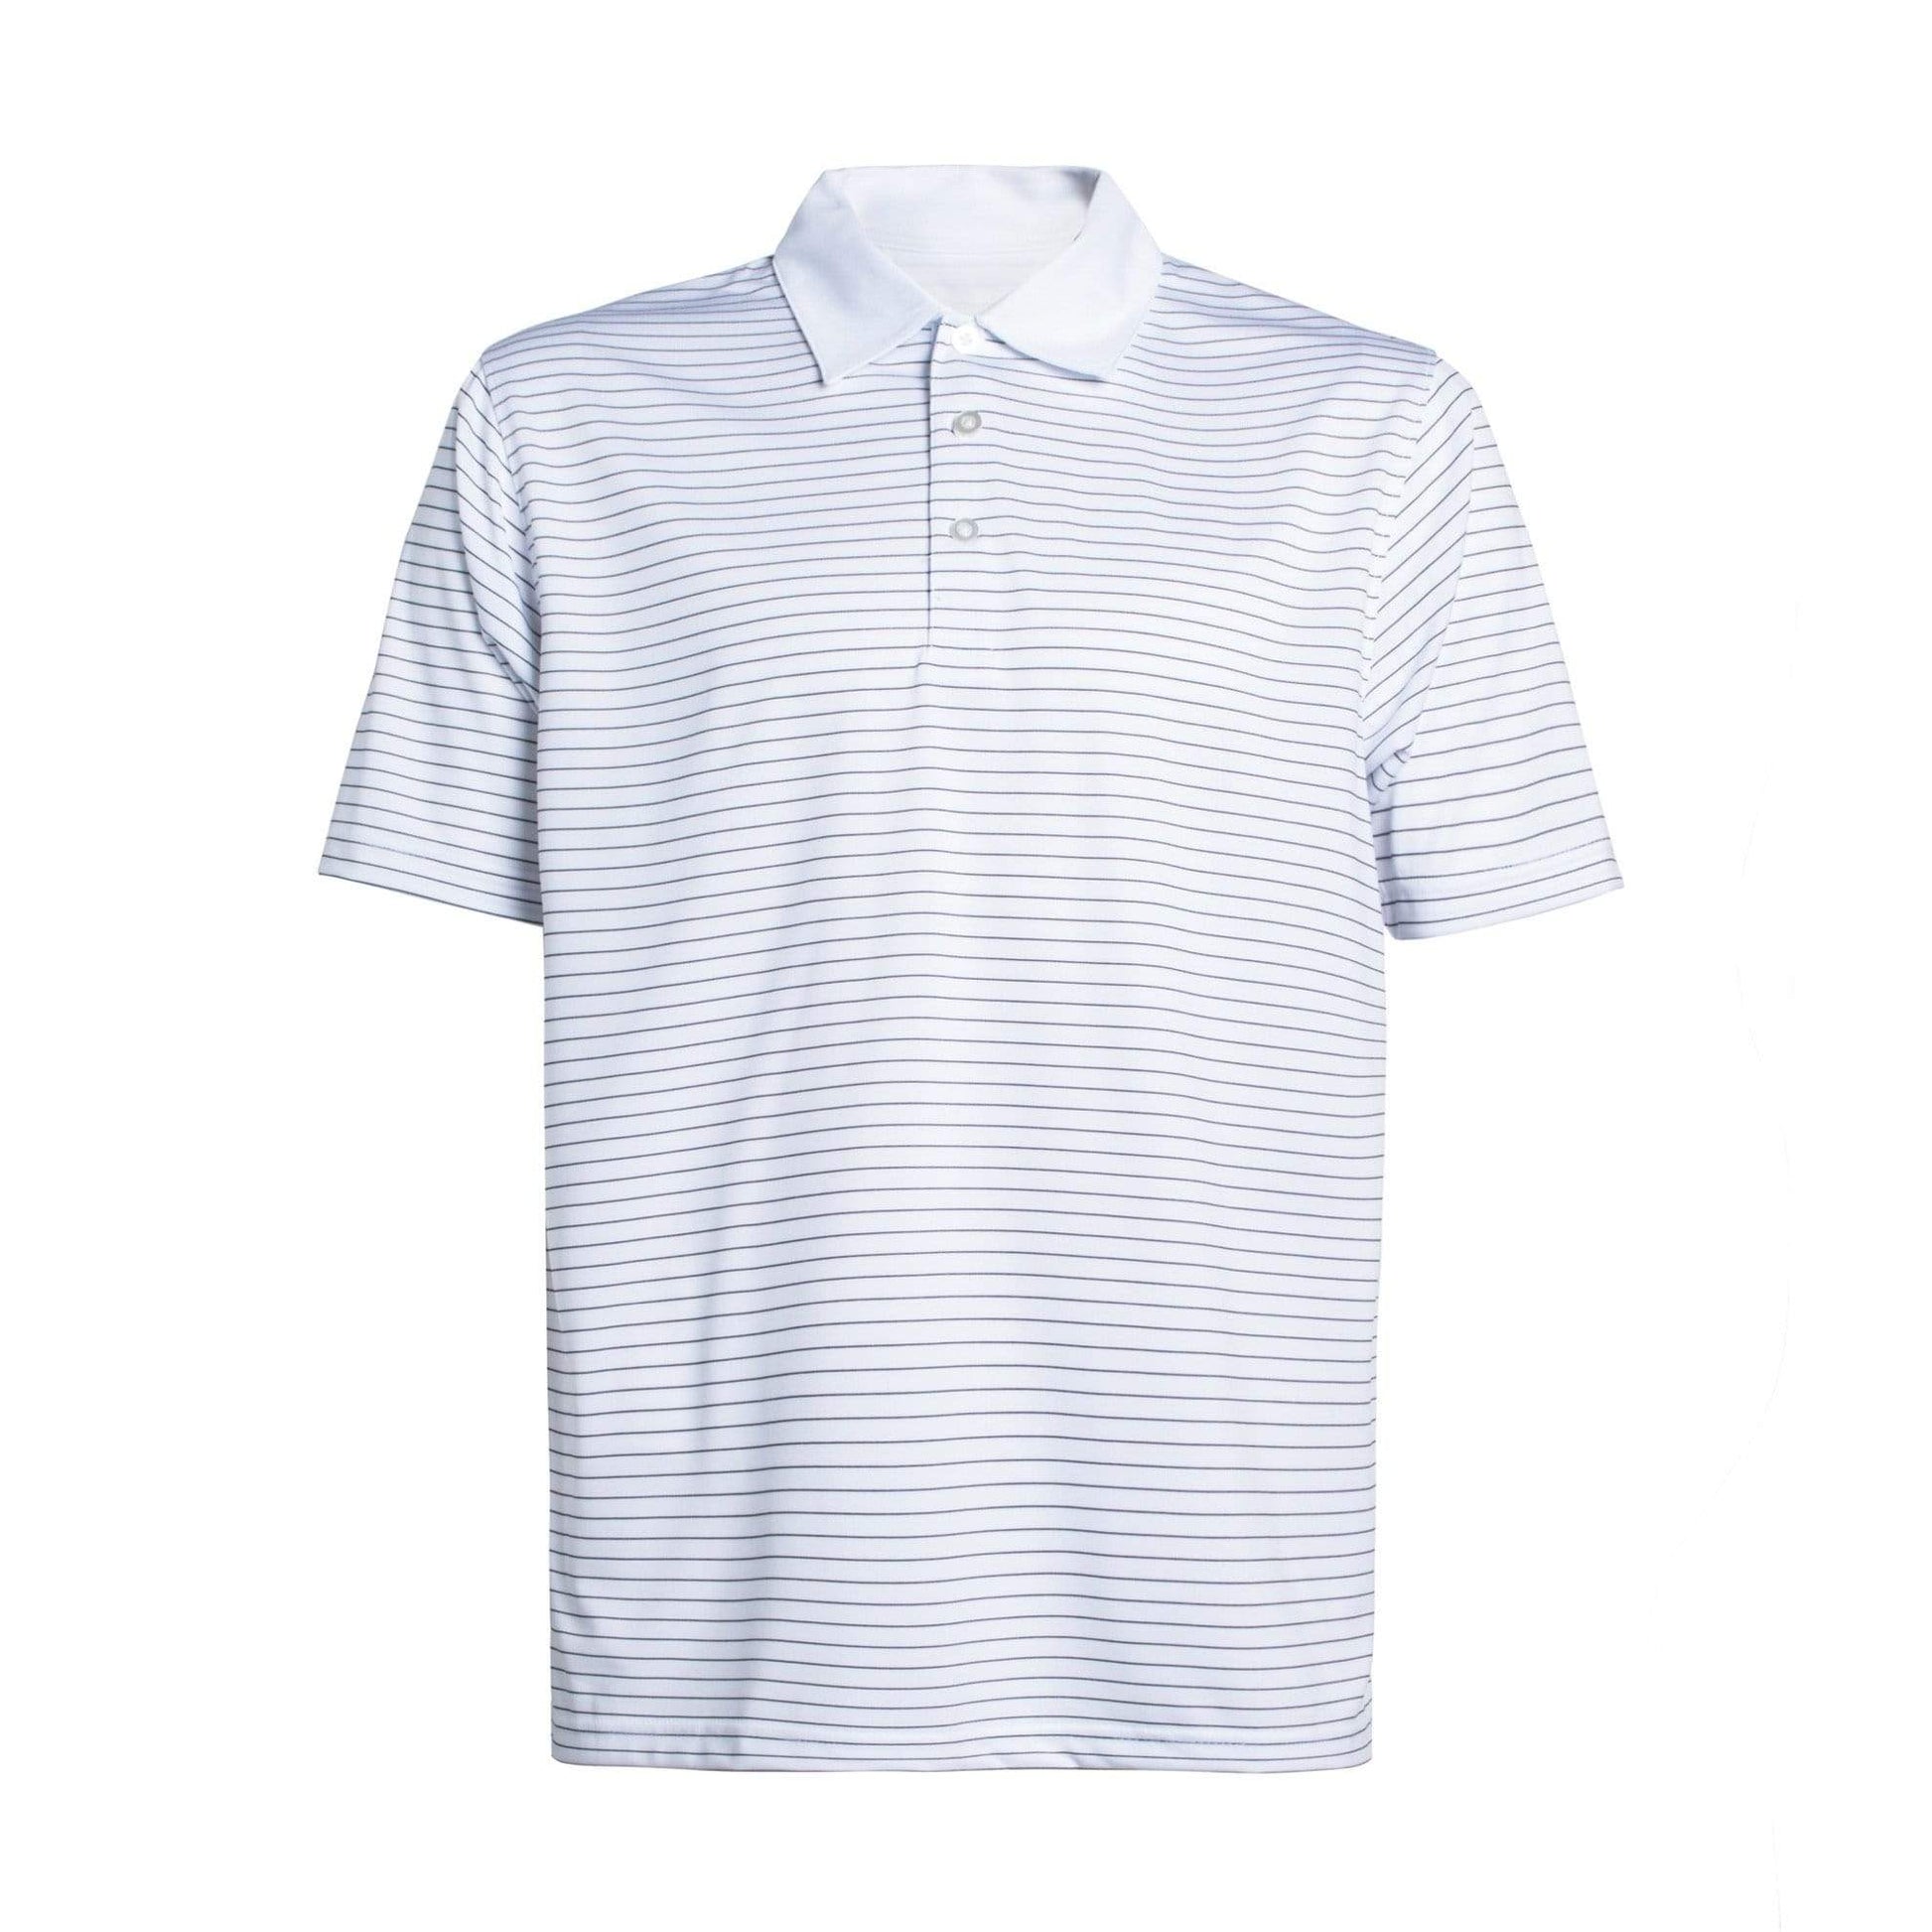 Leo Chevalier Design Printed Tech Polo Shirts Available in Blue & White